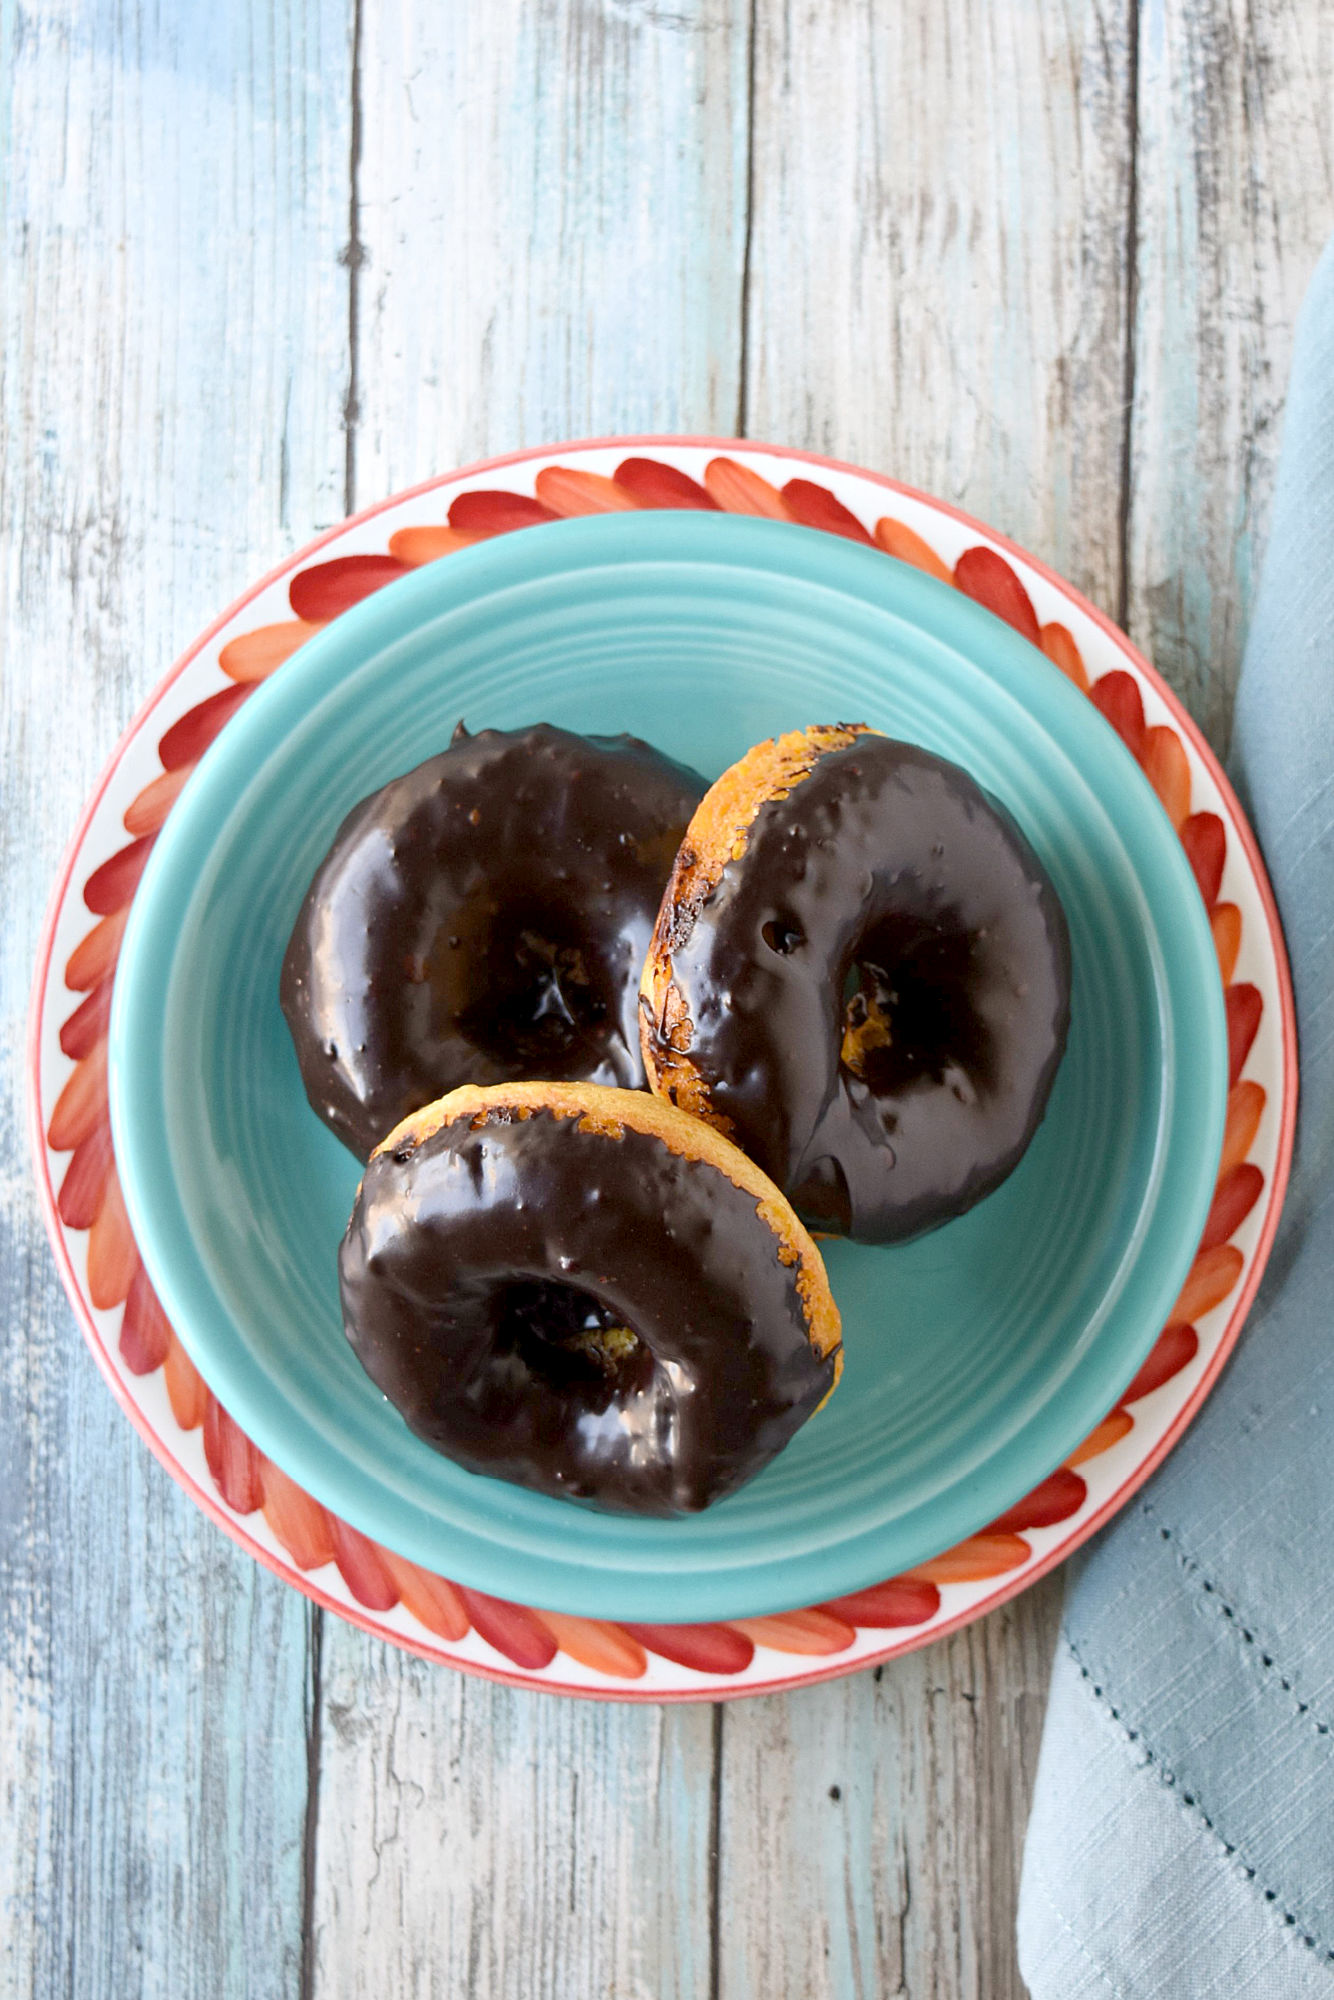 Mandarin Orange Donuts with Ganache Glaze are packed with mandarin orange flavor in a tender baked donut wrapper.  The chocolate scented ganache glaze is an added bonus. #SpringSweetsWeek